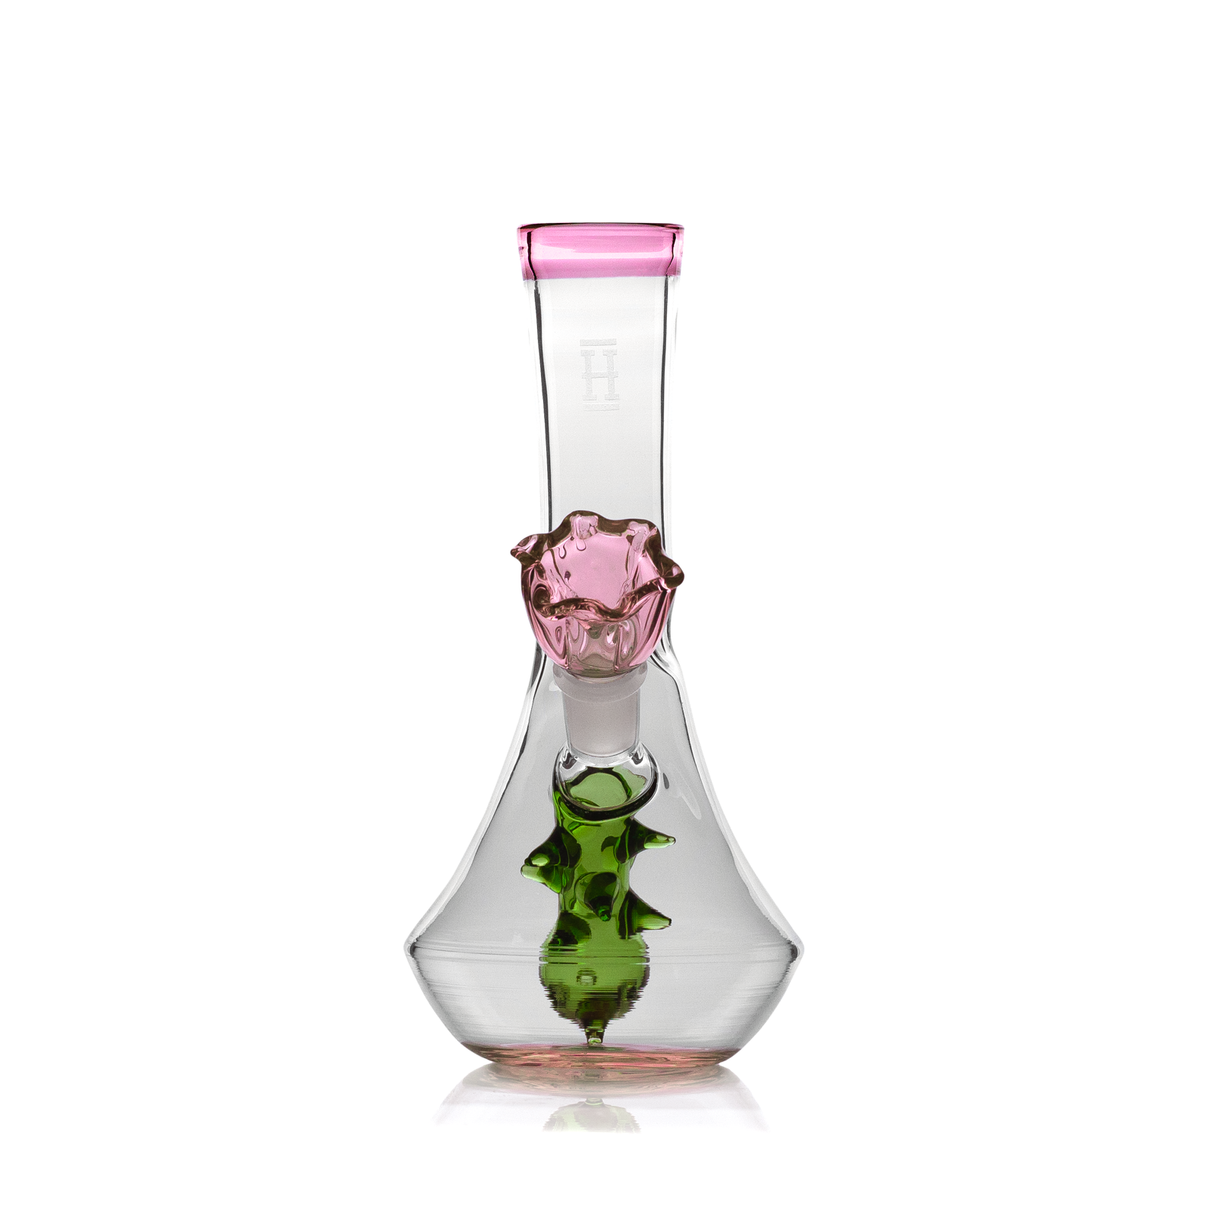 Hemper Flower Vase Bong with Glass on Glass Joint, Front View on White Background